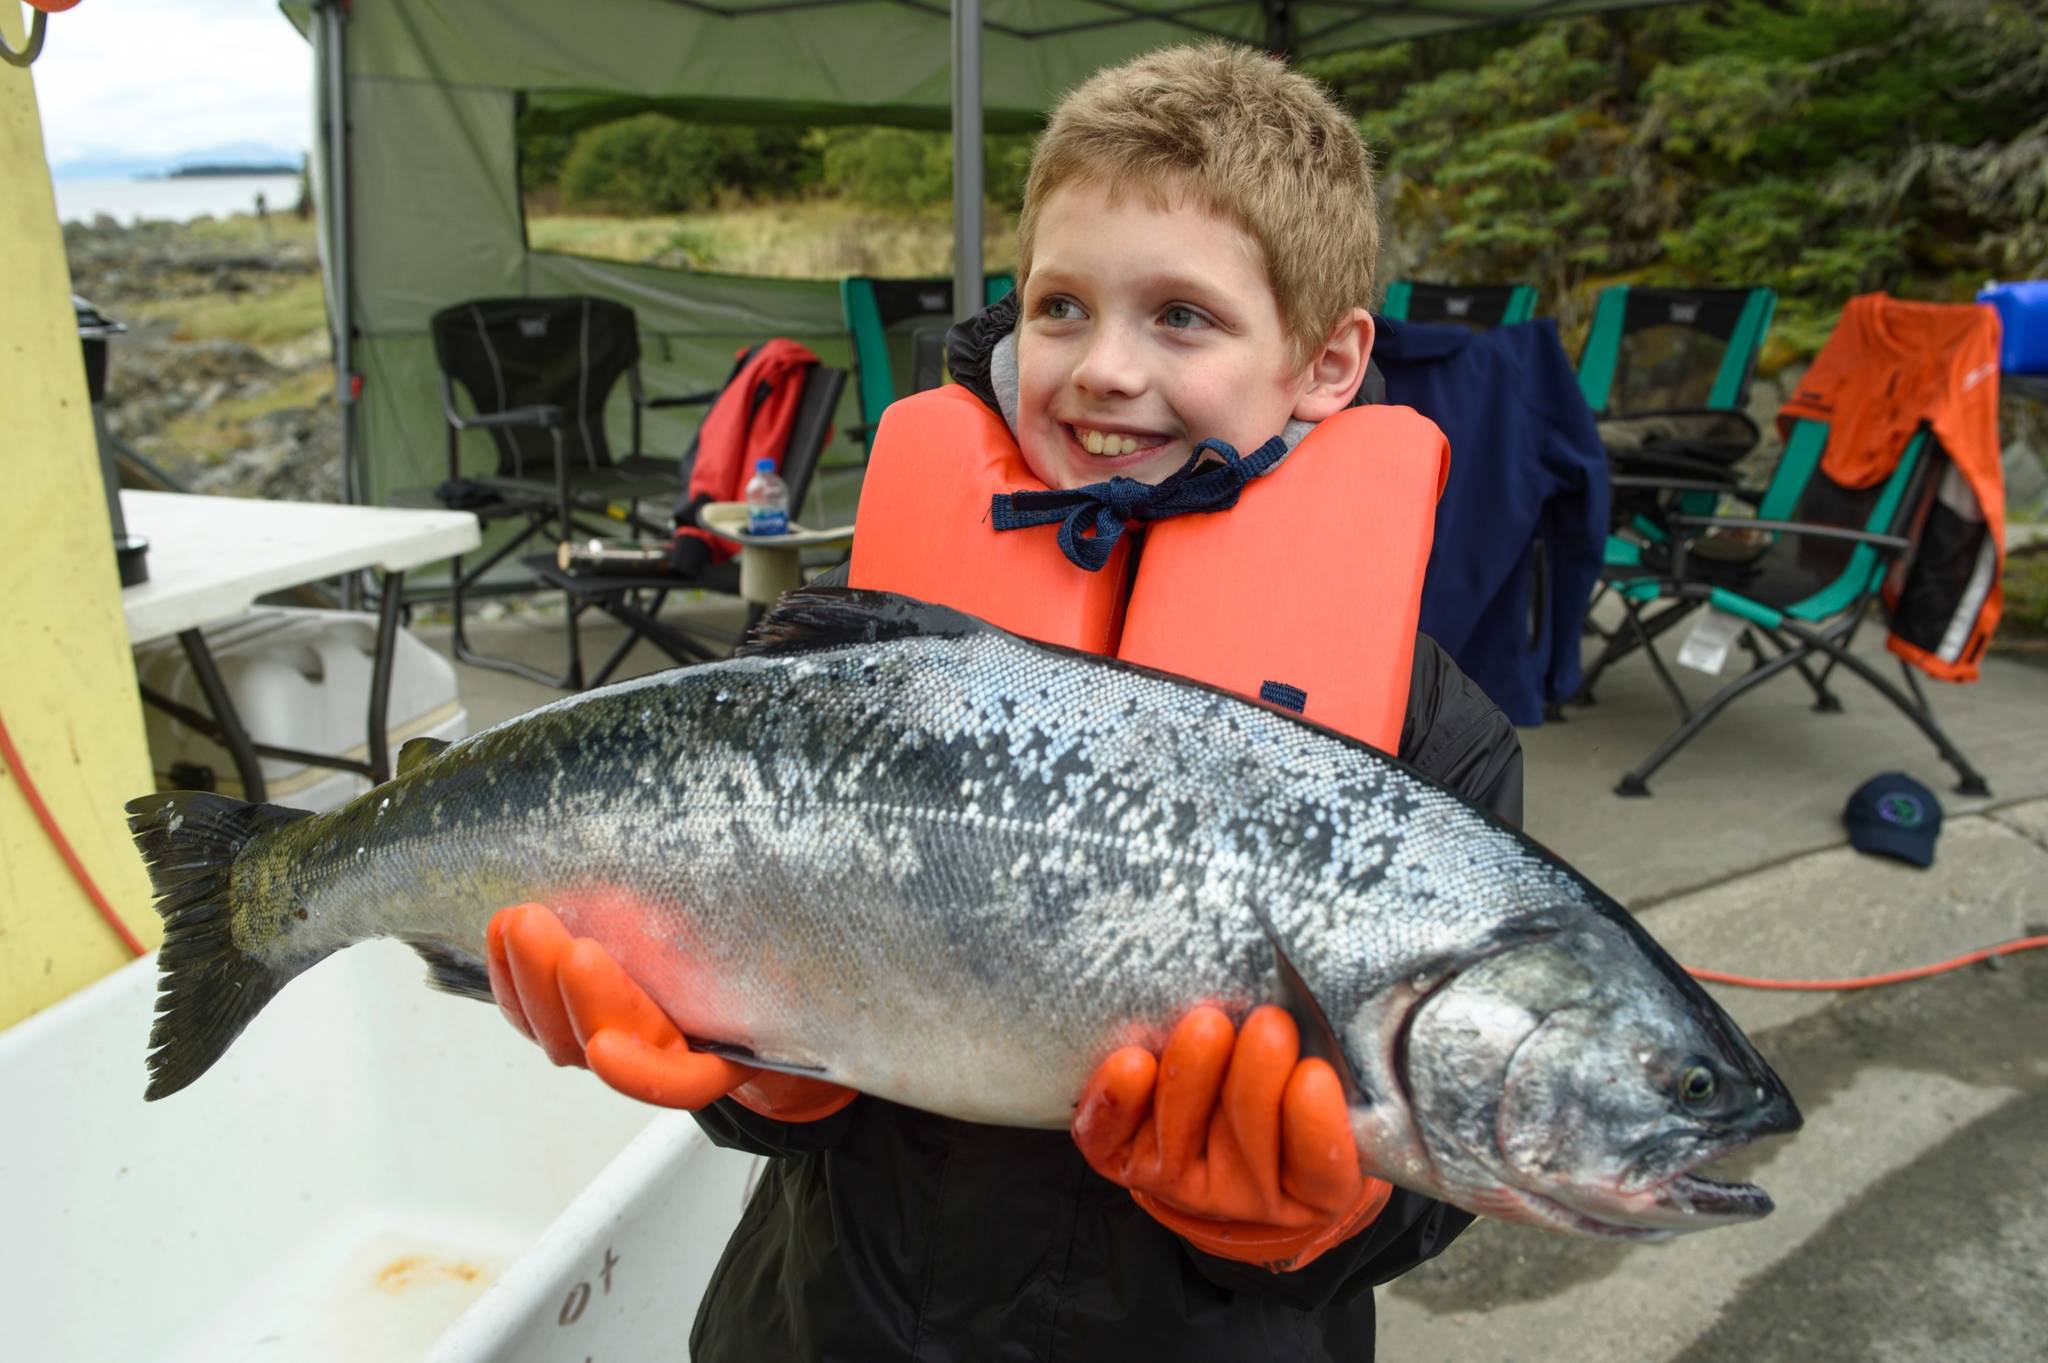 Tito Ritter, 9, holds an 8.5 pound coho he turned in at the Golden North Salmon Derby’s station at Amalga Harbor on Saturday. (Michael Penn | Juneau Empire)